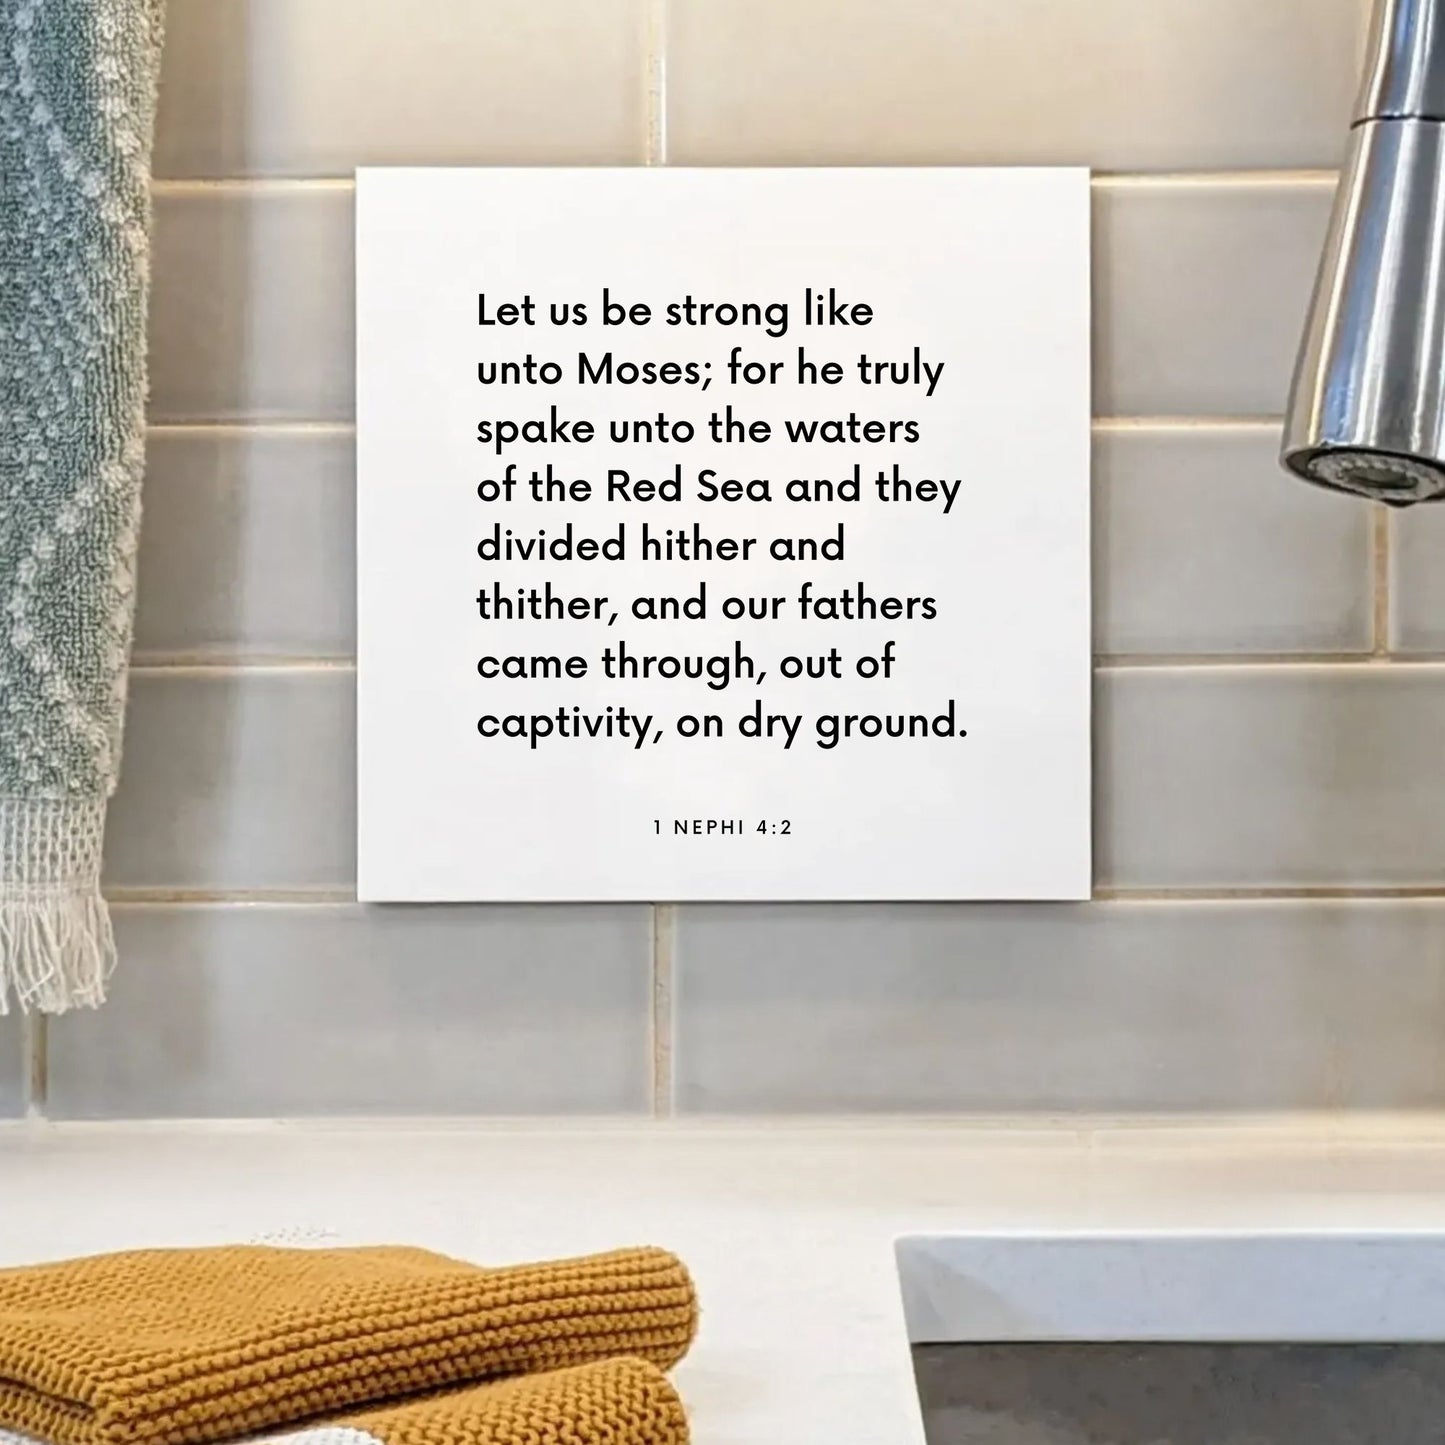 Sink mouting of the scripture tile for 1 Nephi 4:2 - "Let us be strong like unto Moses"